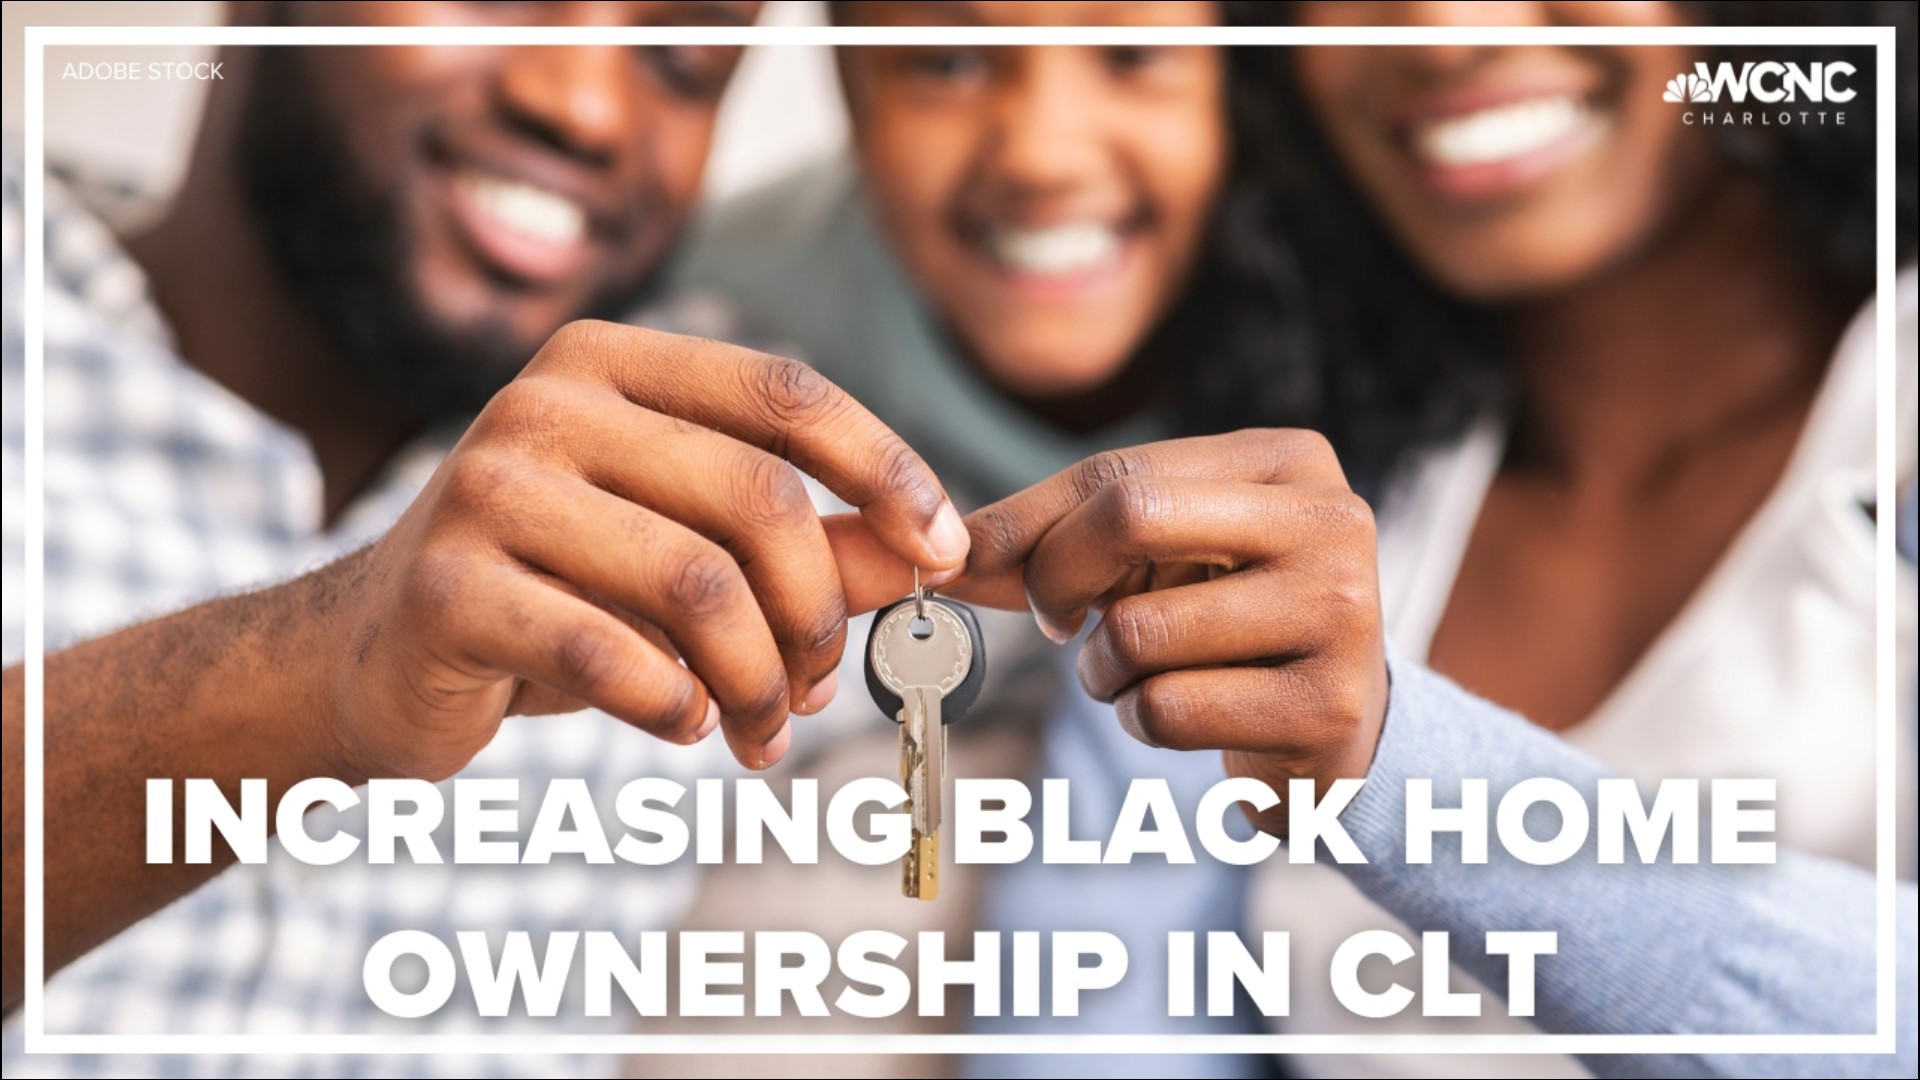 Only around 40% of people of color are home owners in Charlotte.